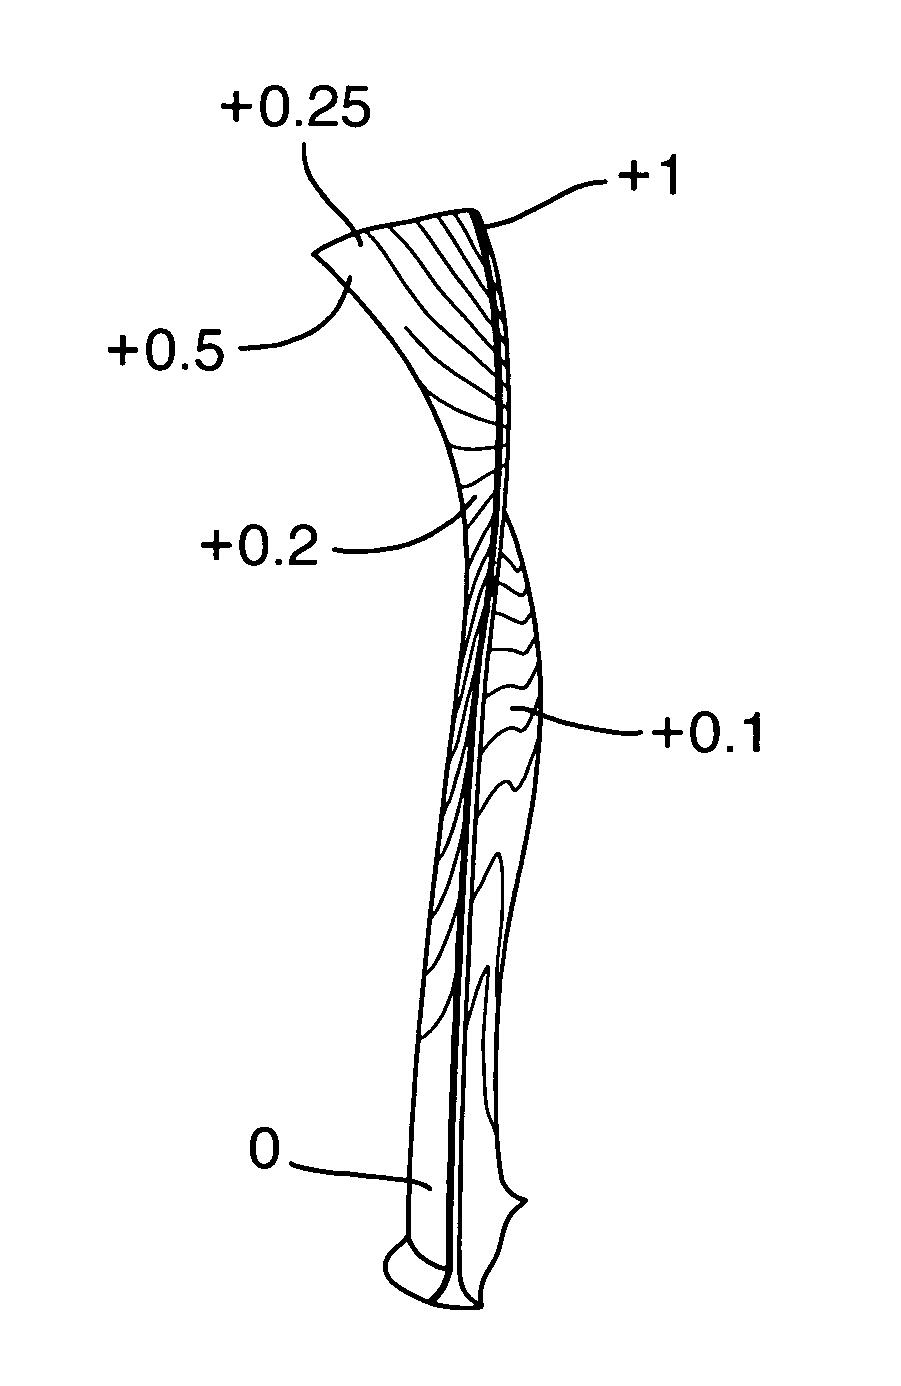 Vanes for exposure to vibratory loading